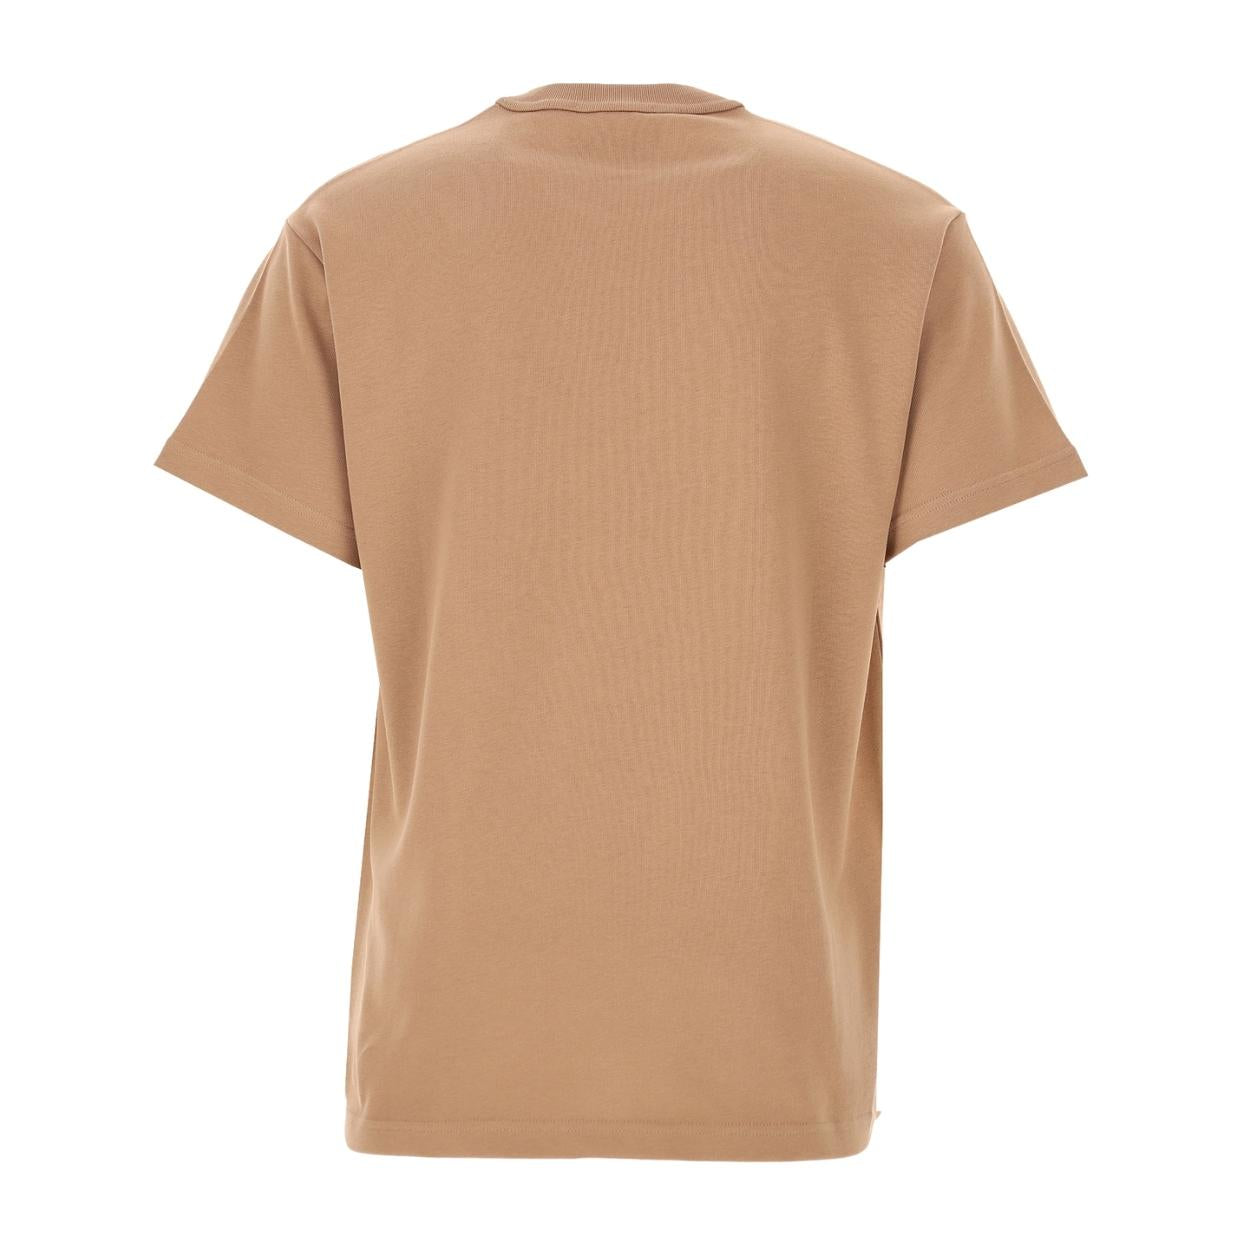 Versace Jeans Couture Printed Logo Brown T-Shirt